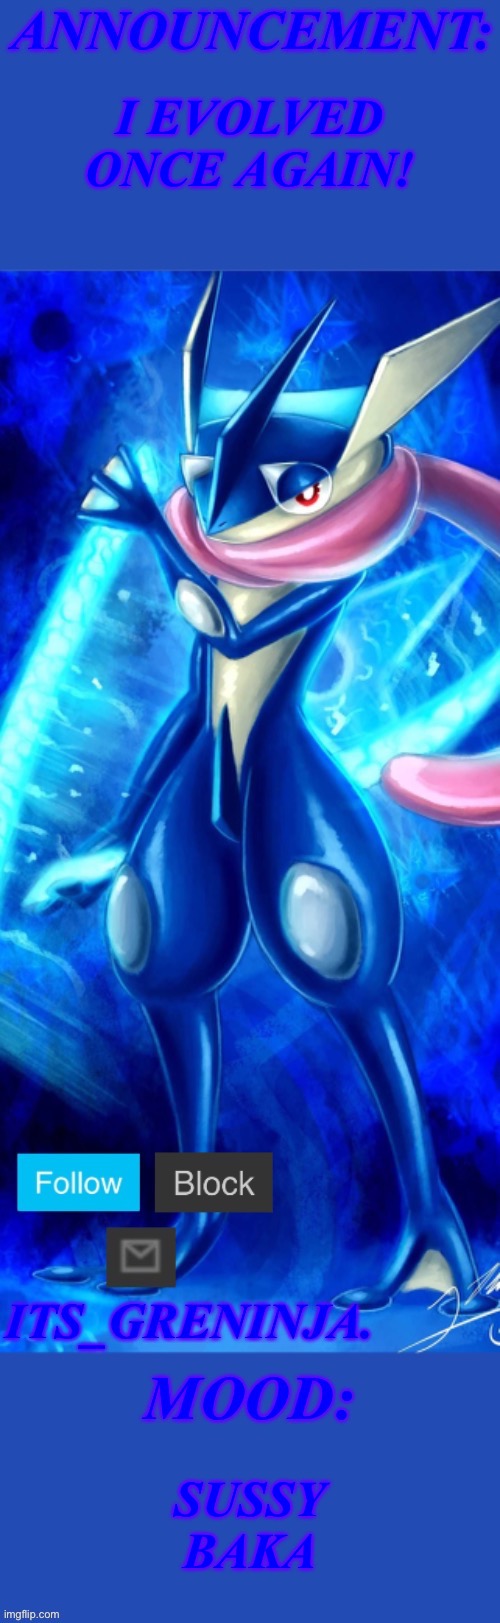 Yooooo! | I EVOLVED ONCE AGAIN! SUSSY BAKA | image tagged in its_greninja announcement template,memes,pokemon,announcement,greninja,why are you reading this | made w/ Imgflip meme maker